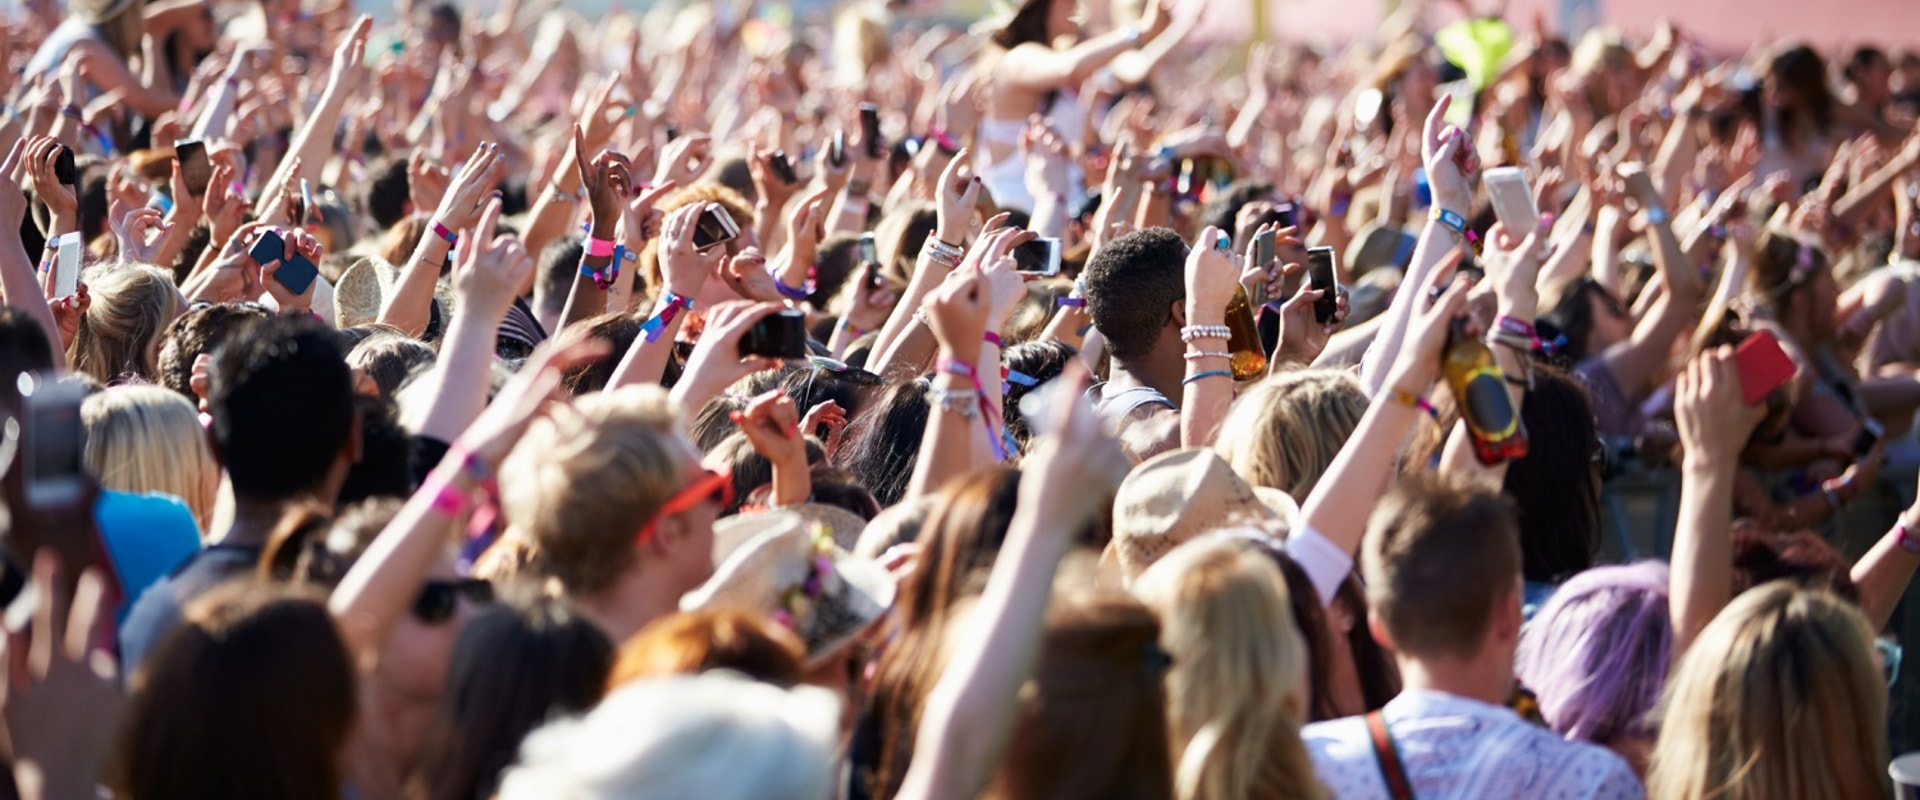 Why are music festivals so important?